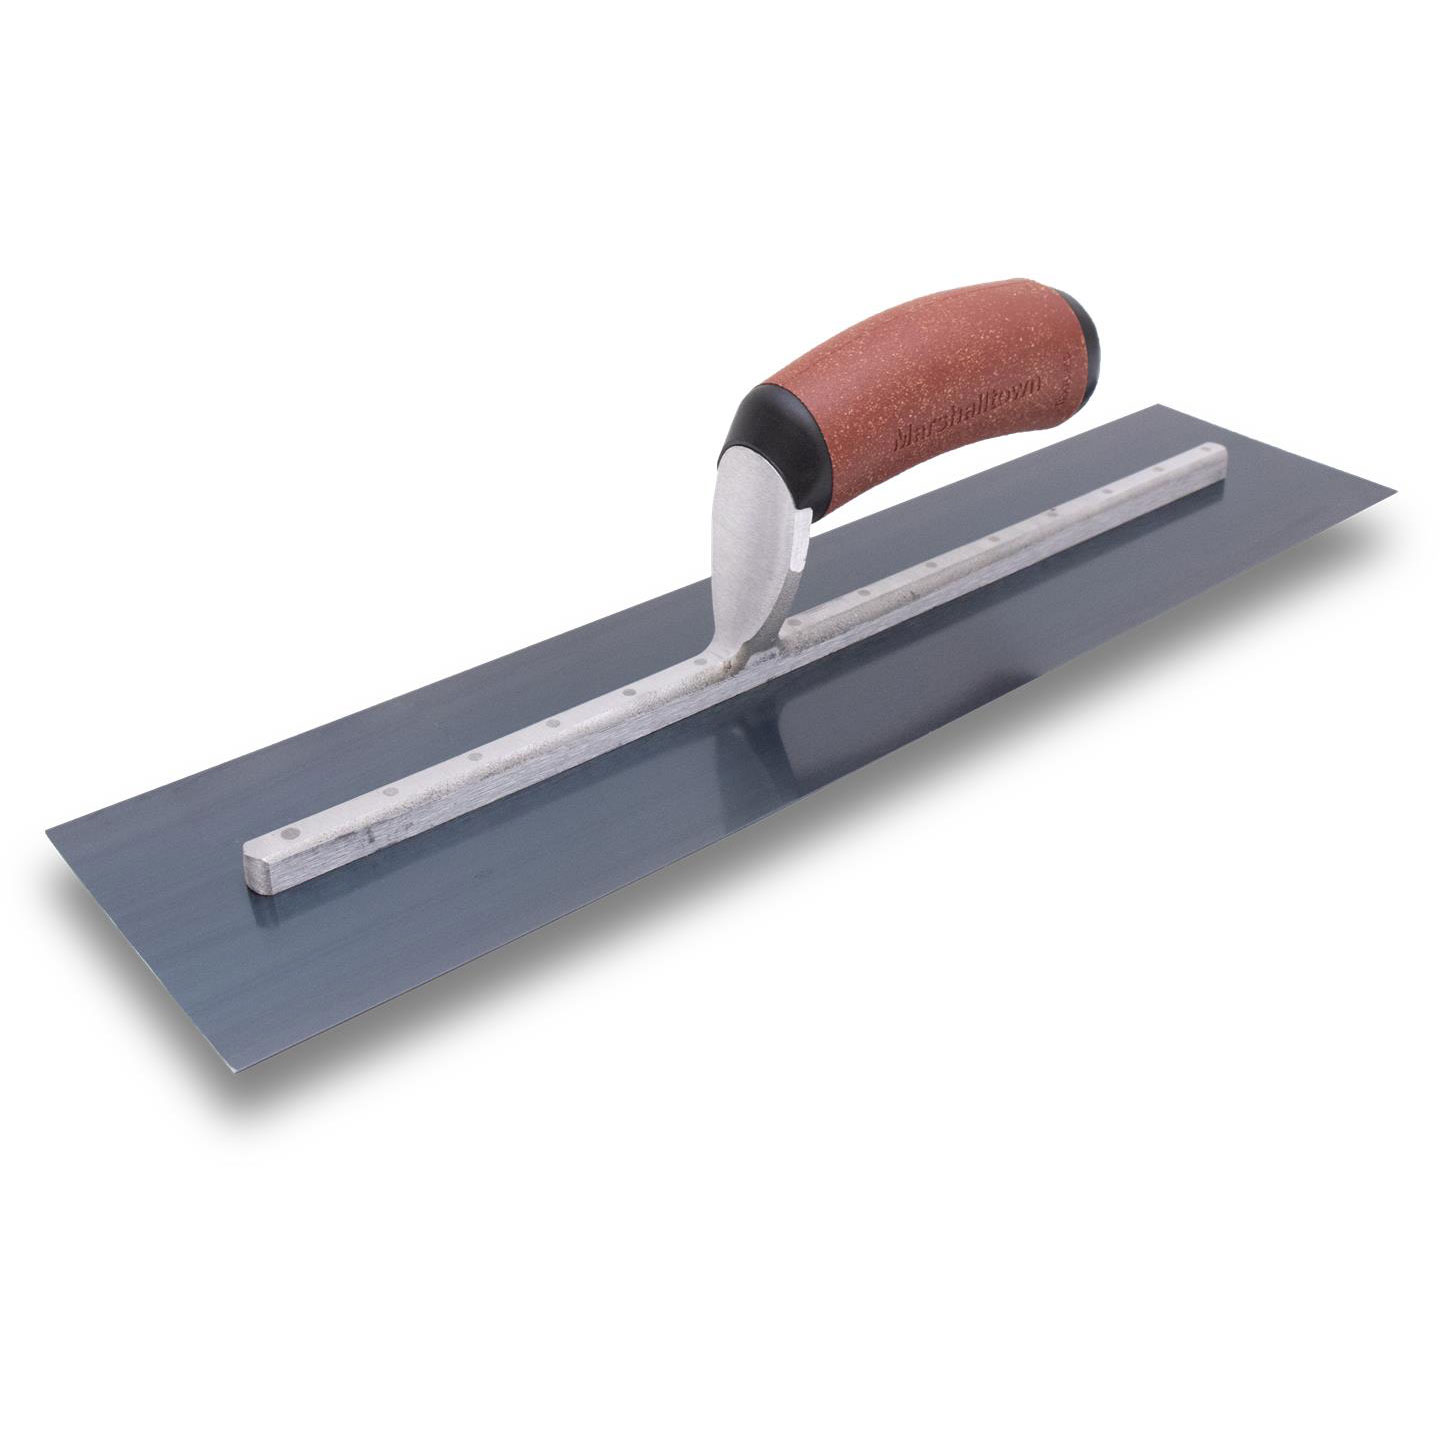 Marshalltown MXS62BDC 12in x 4in Blue Steel Finishing Trowel with DuraCork Handle MXS62BDC